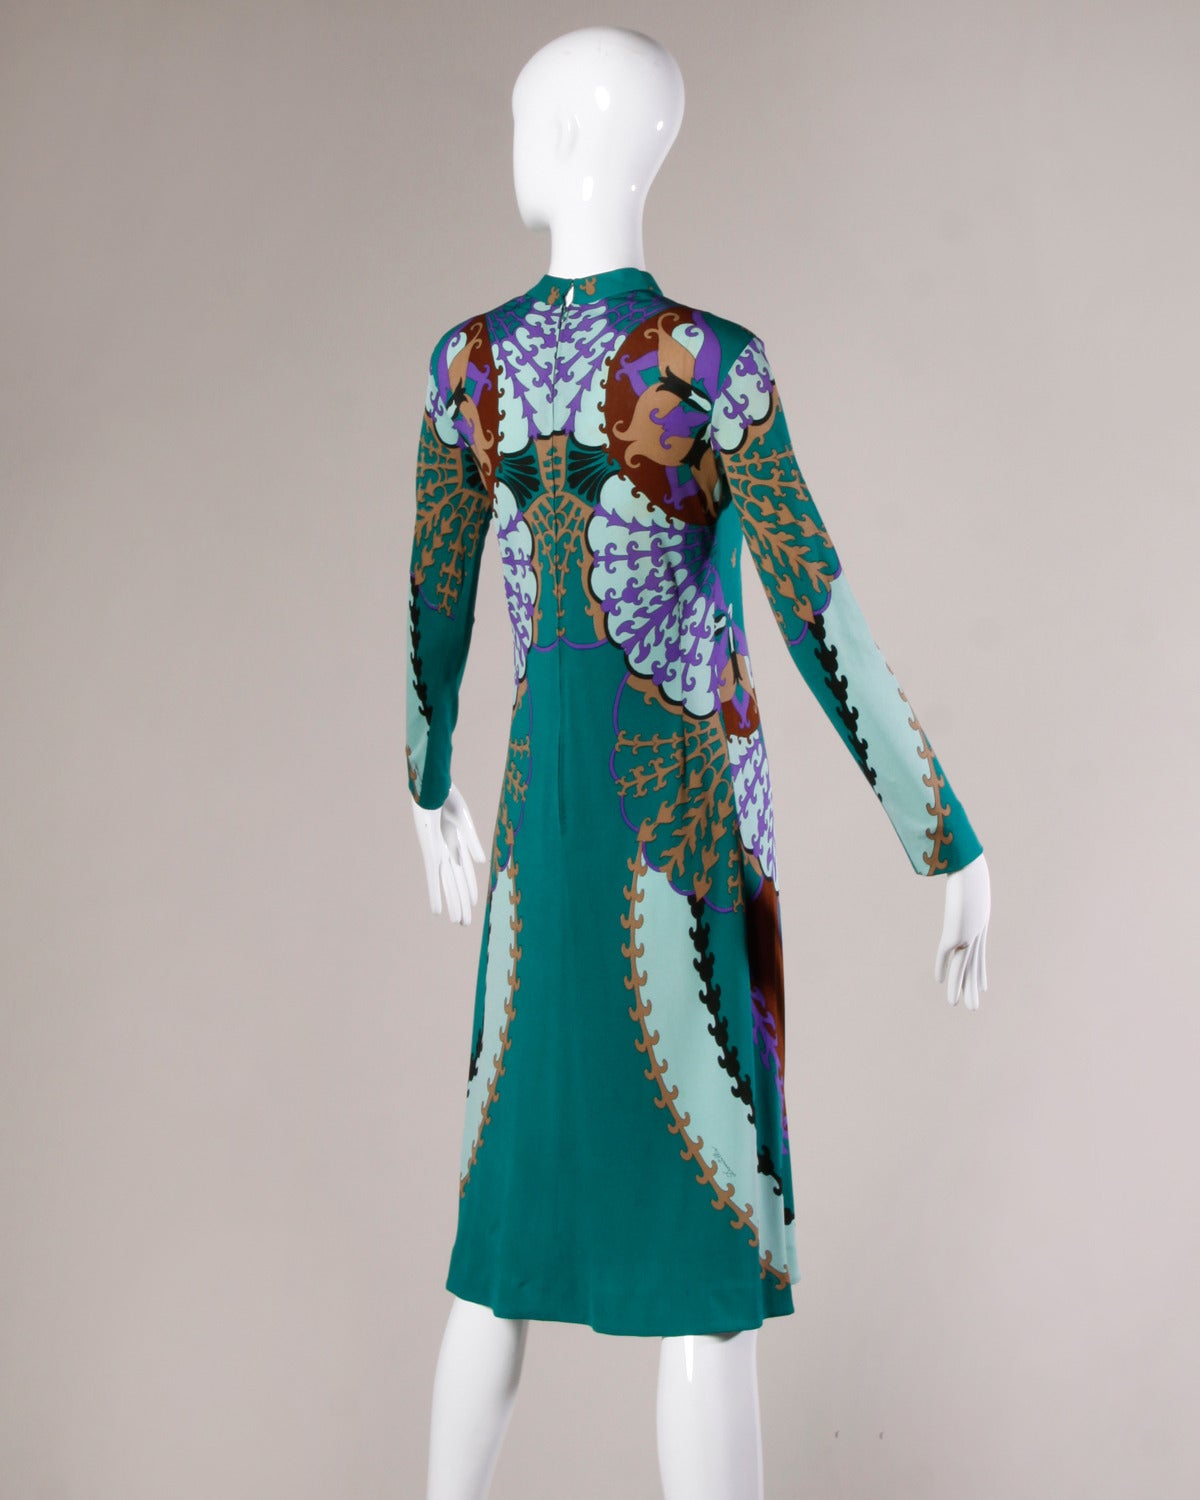 Gorgeous slinky Italian silk jersey dress by Domitilla for Holt Renfrew with a colorful mirror print. Domitilla signature in the print on the front of the dress. Gorgeous and coveted print and very rare designer.

Details:

Unlined
Back Zip and